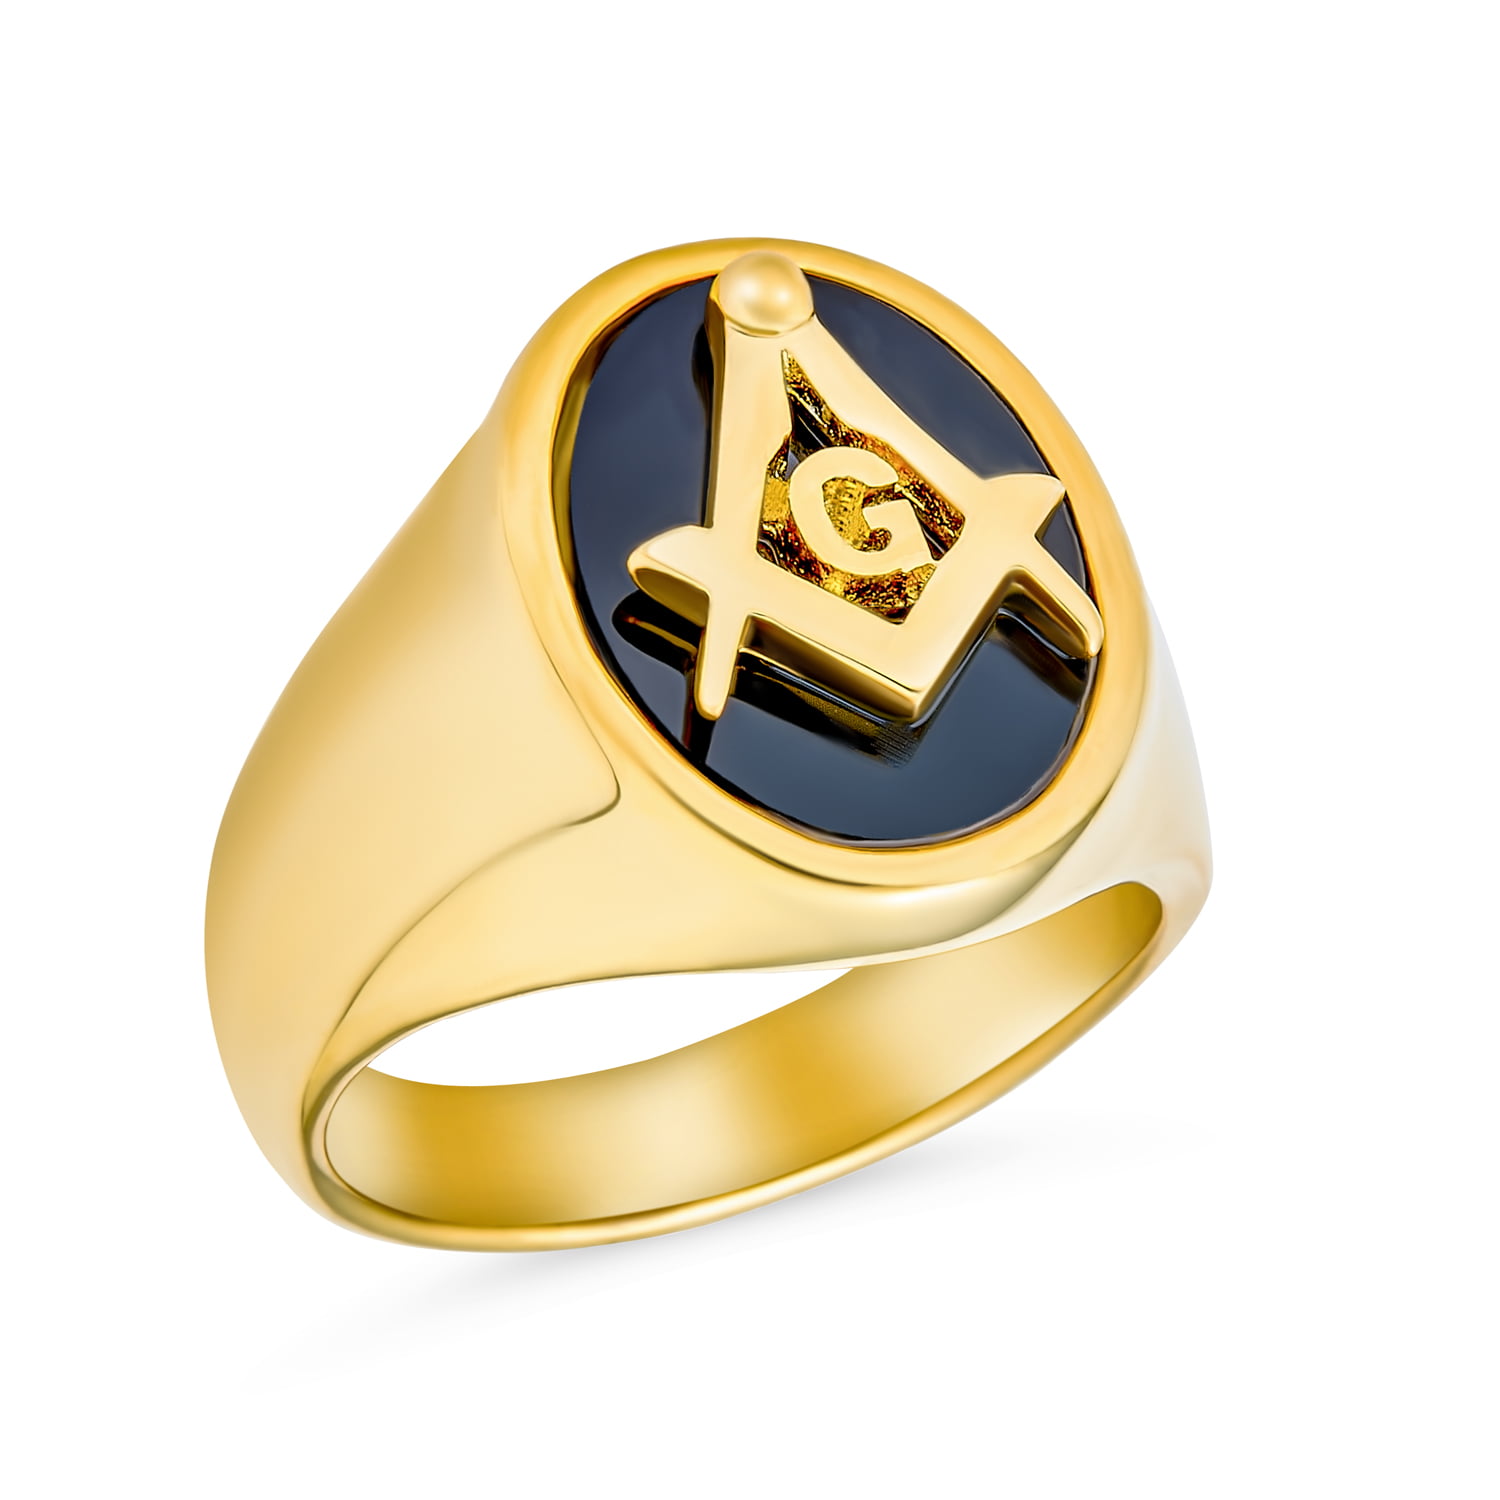 Gold Plated & Stainless Steel Masonic Men's Ring Featuring The Square & Compass 